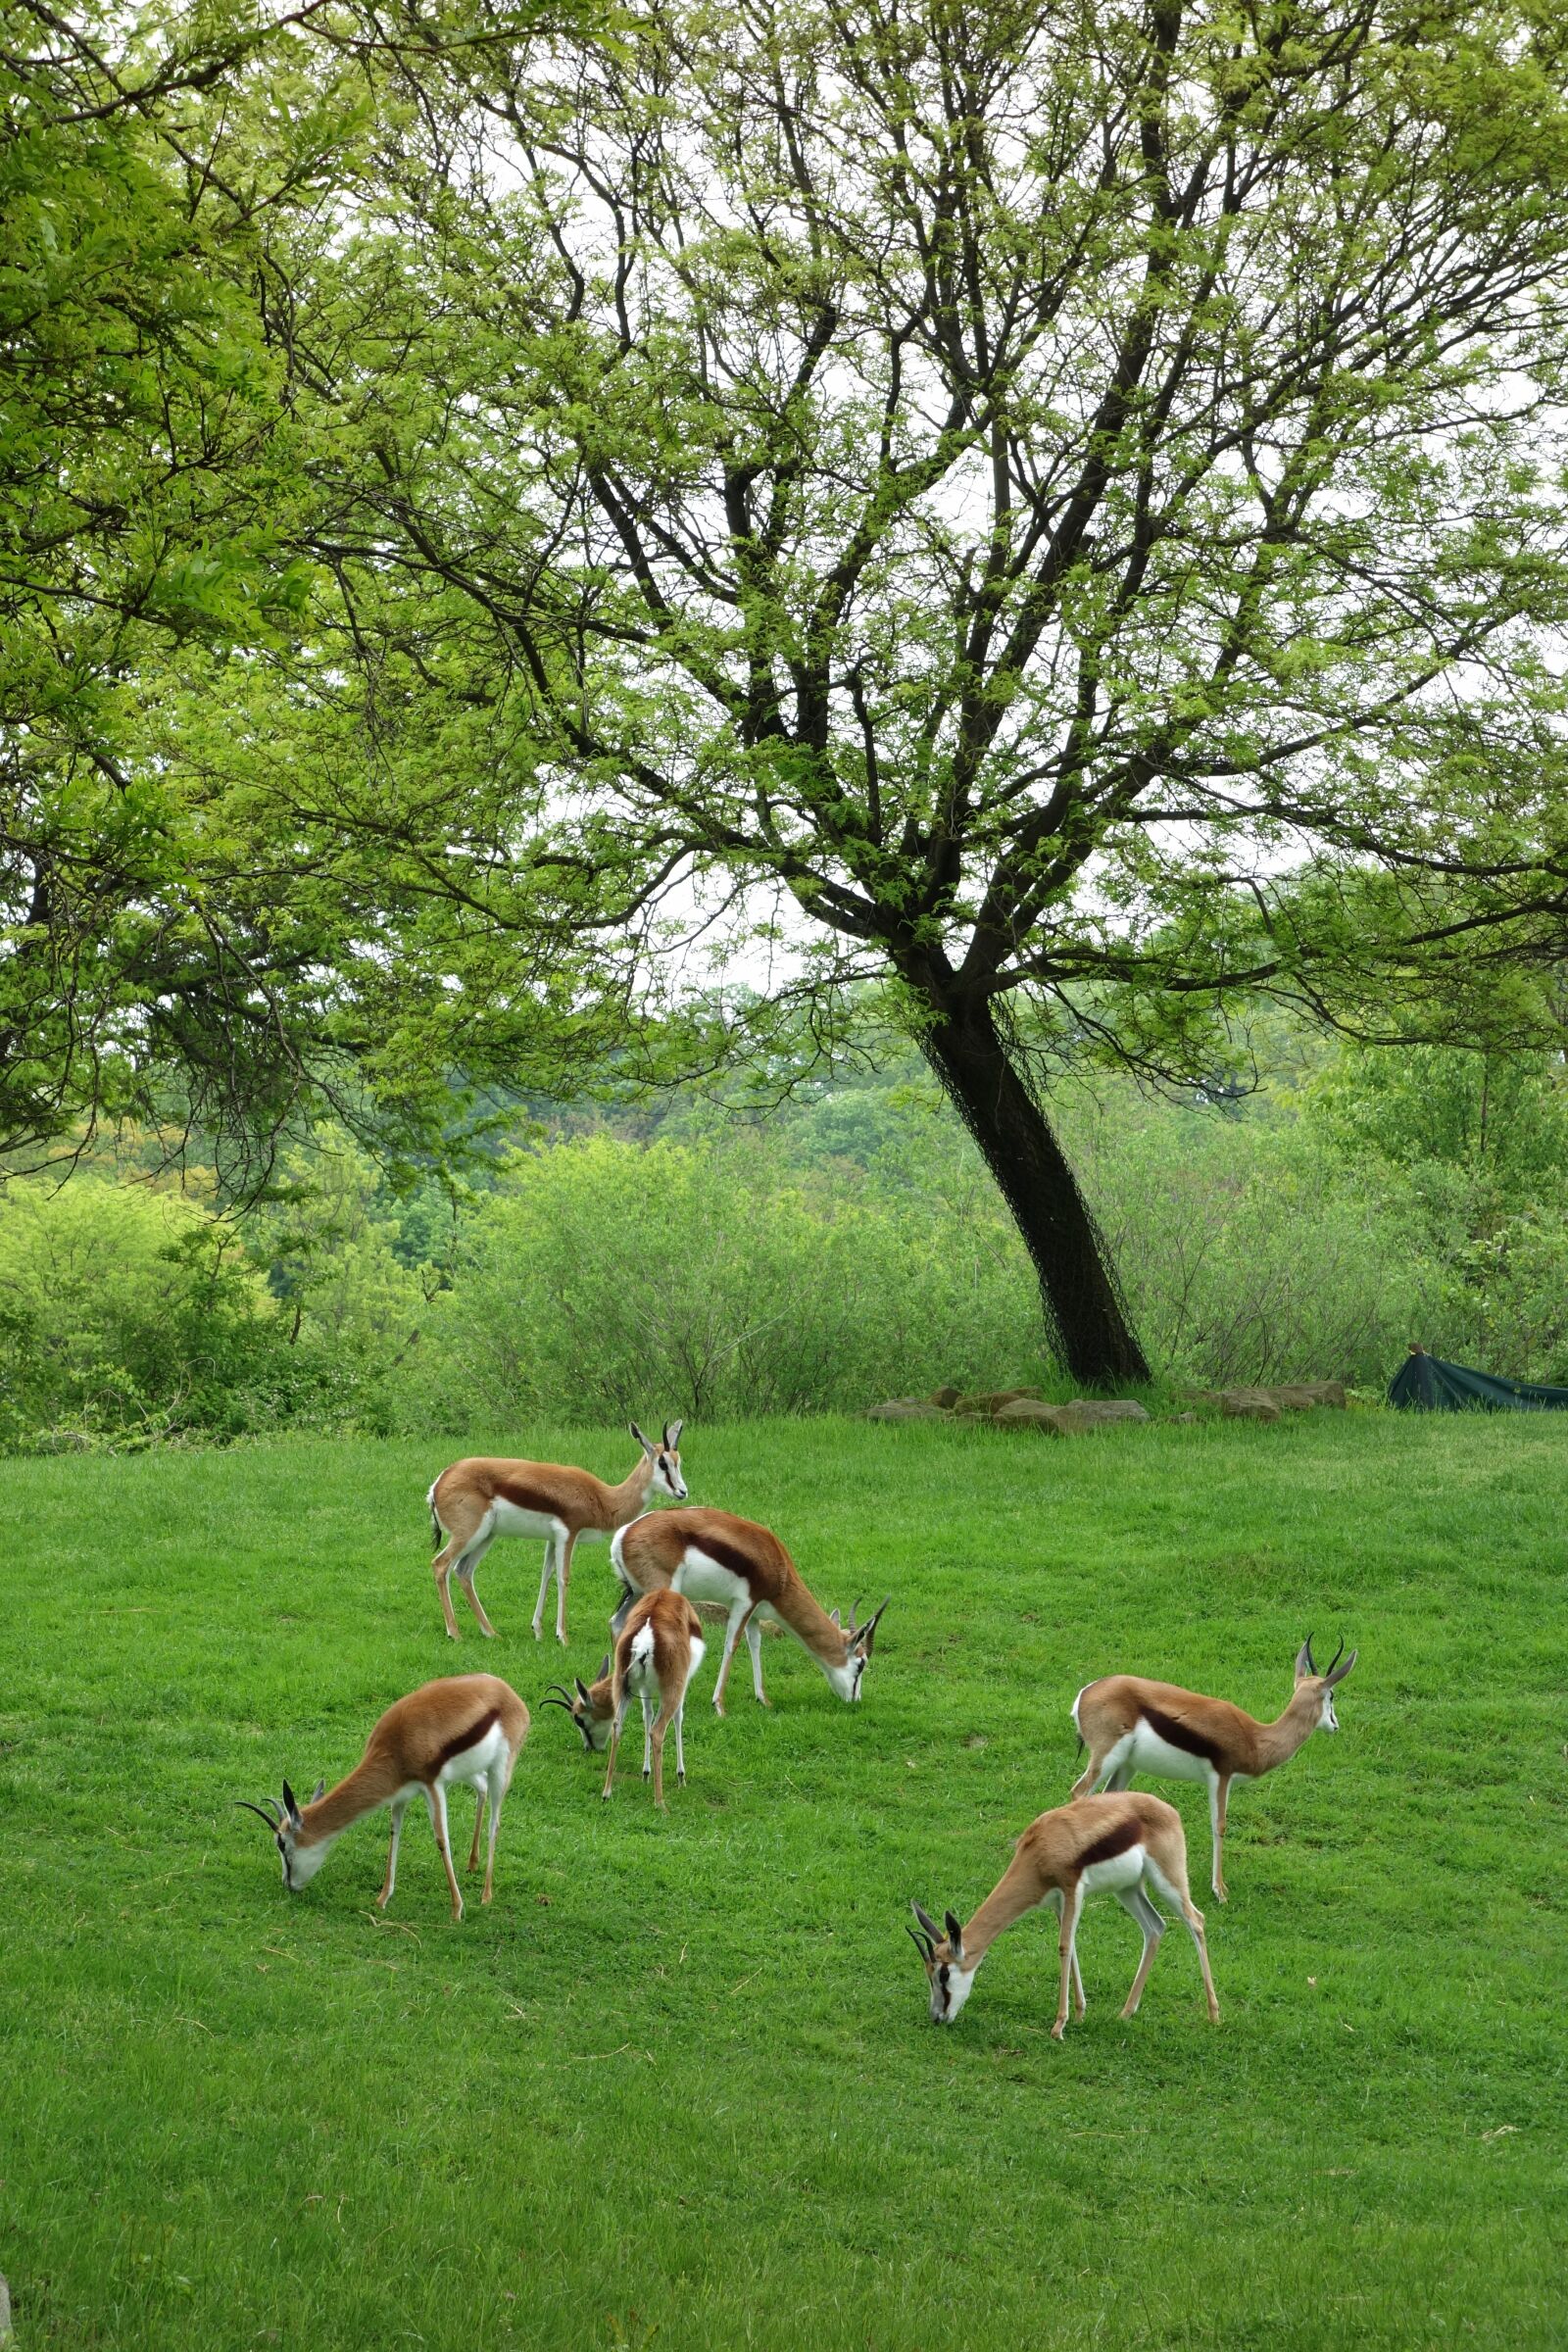 Sony Cyber-shot DSC-RX100 sample photo. Antelopes, pittsburgh, zoo photography